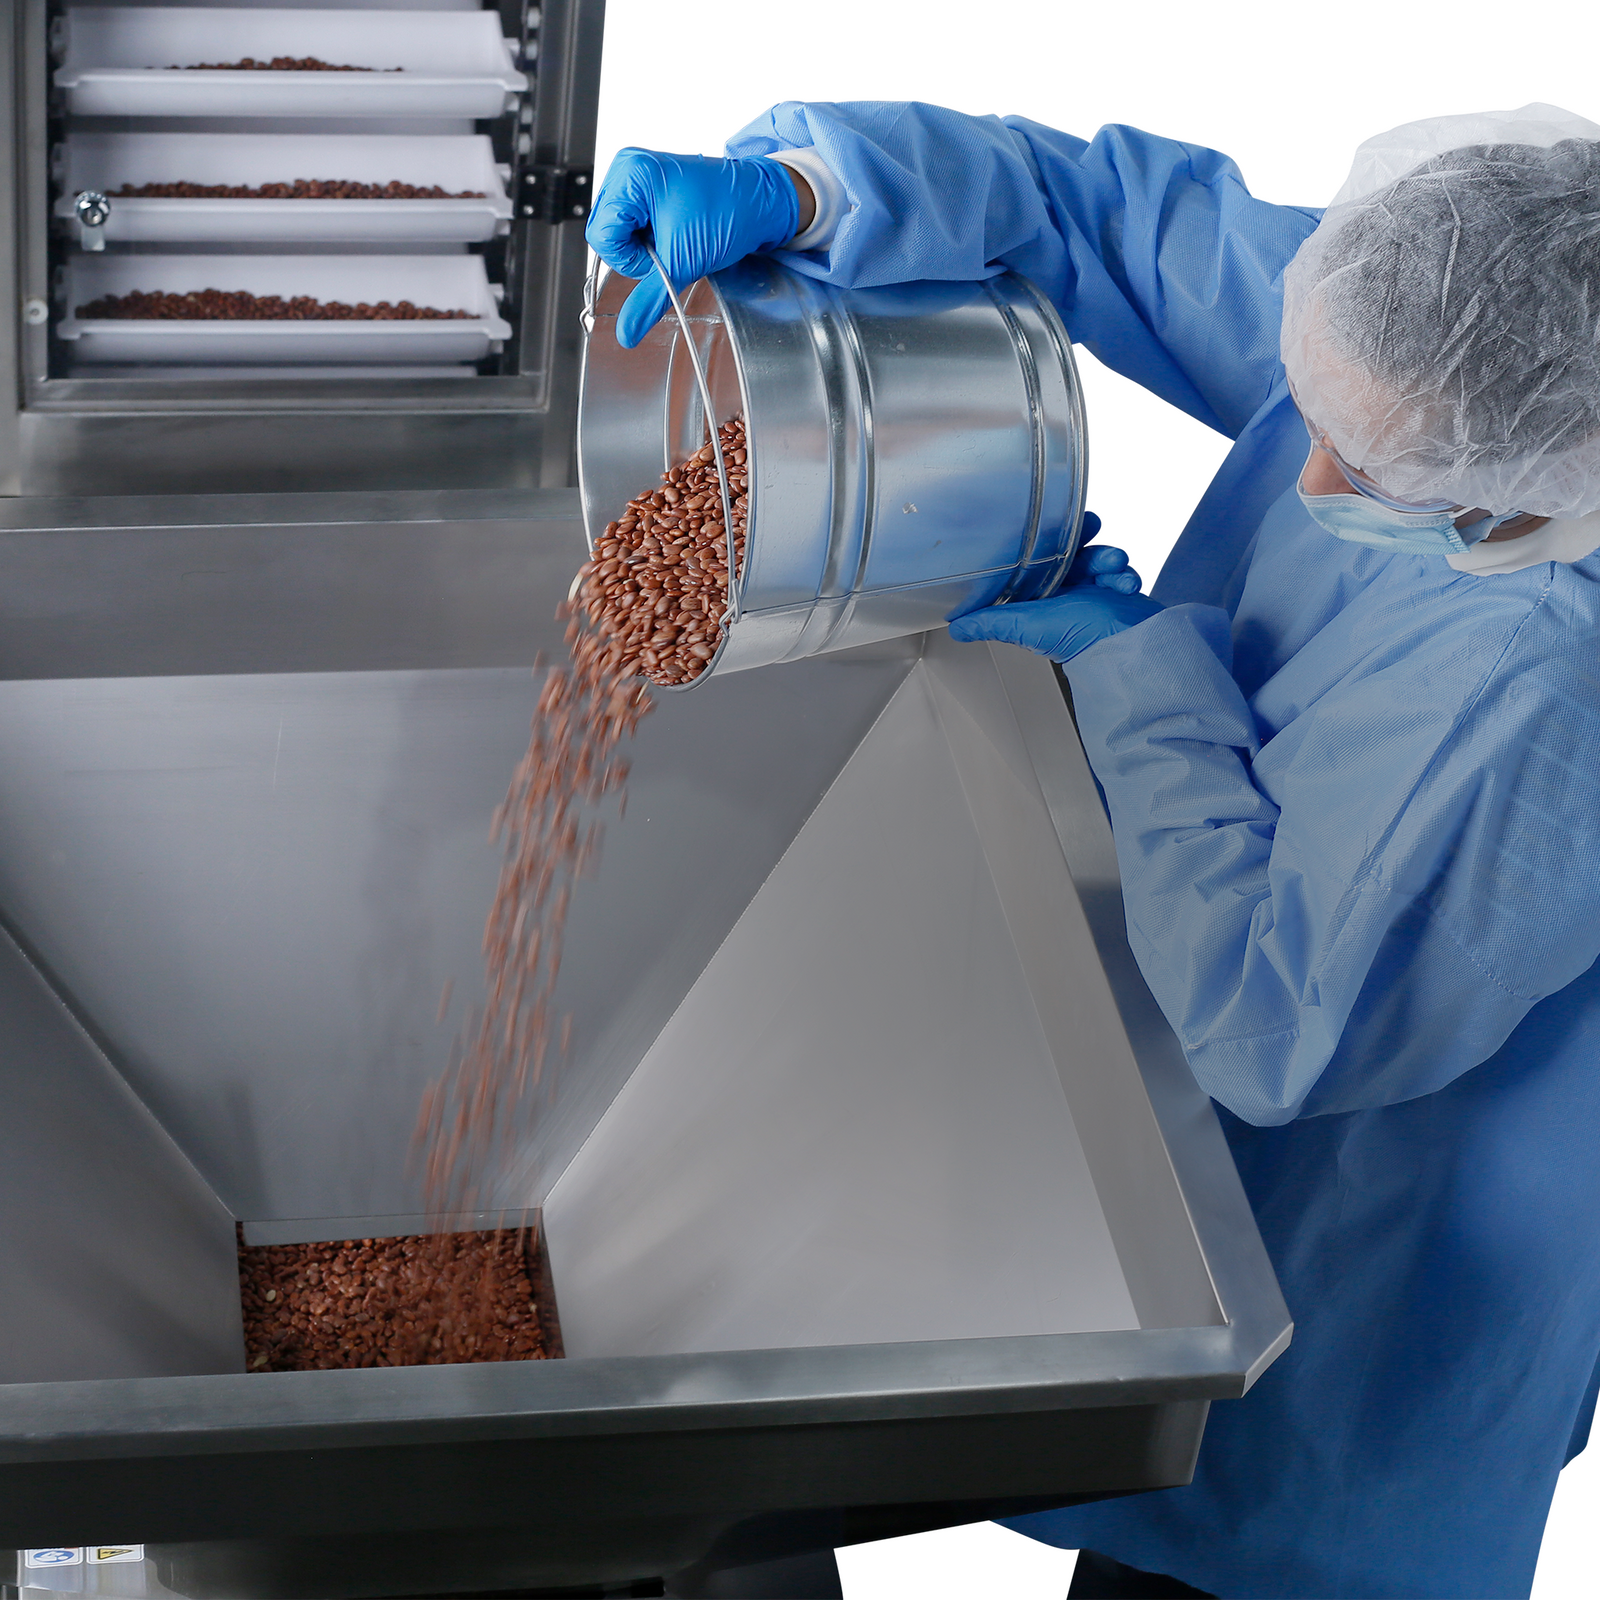 A worker wearing disposable protective equipment dispensing red grains into the hopper of a vibratory feeder positioned next to a JORES TECHNOLOGIES® Motorized Bucket elevator. Beans can be seen transported inside the motorized conveyor